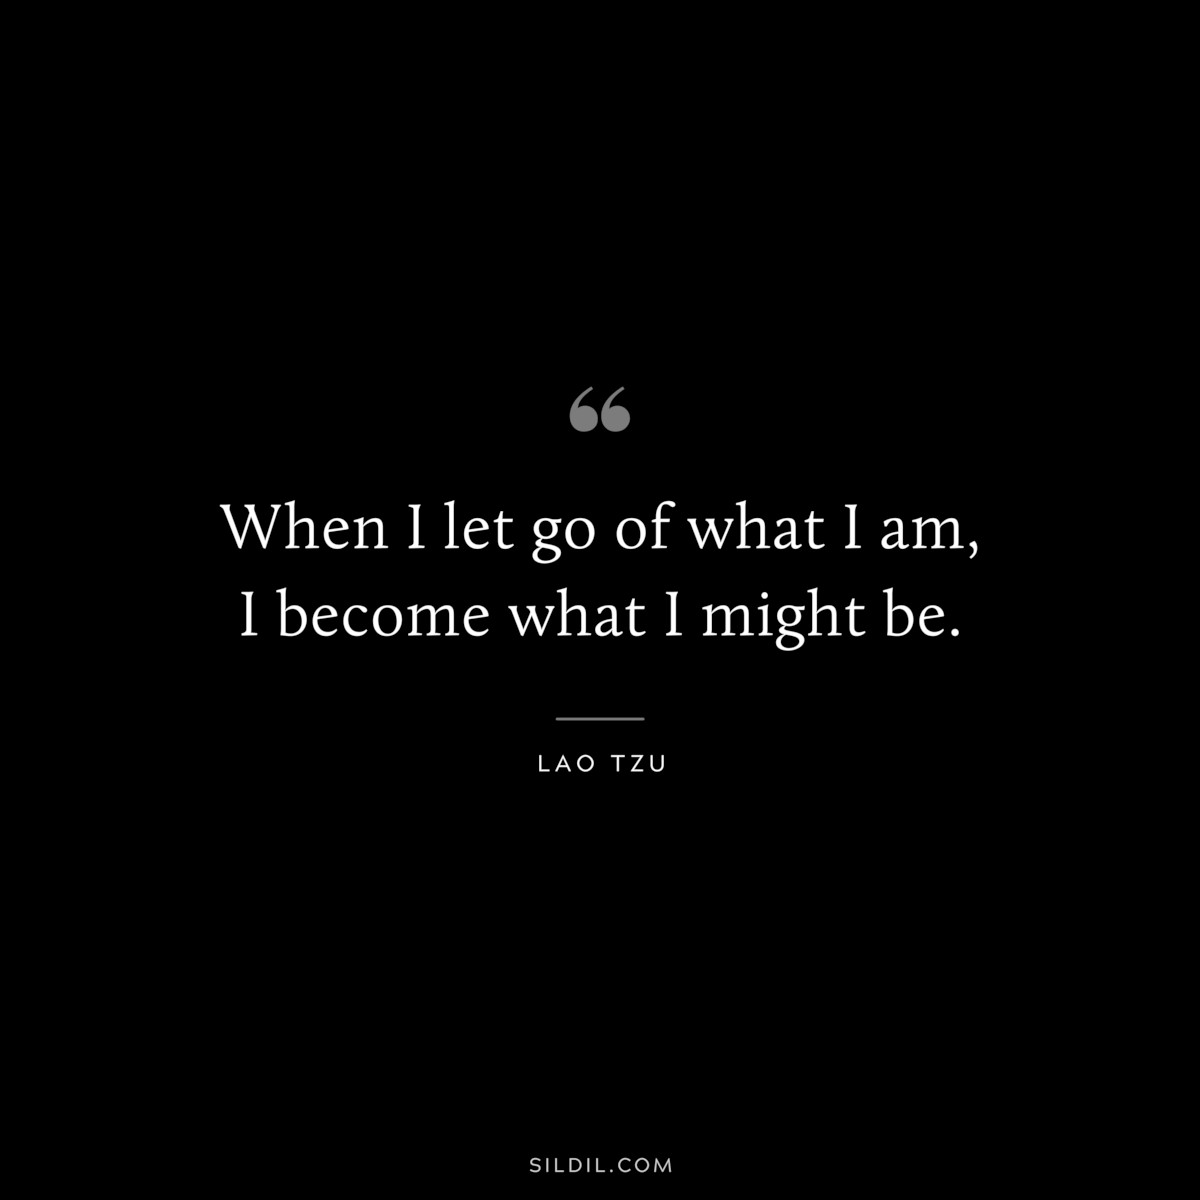 When I let go of what I am, I become what I might be. ― Lao Tzu